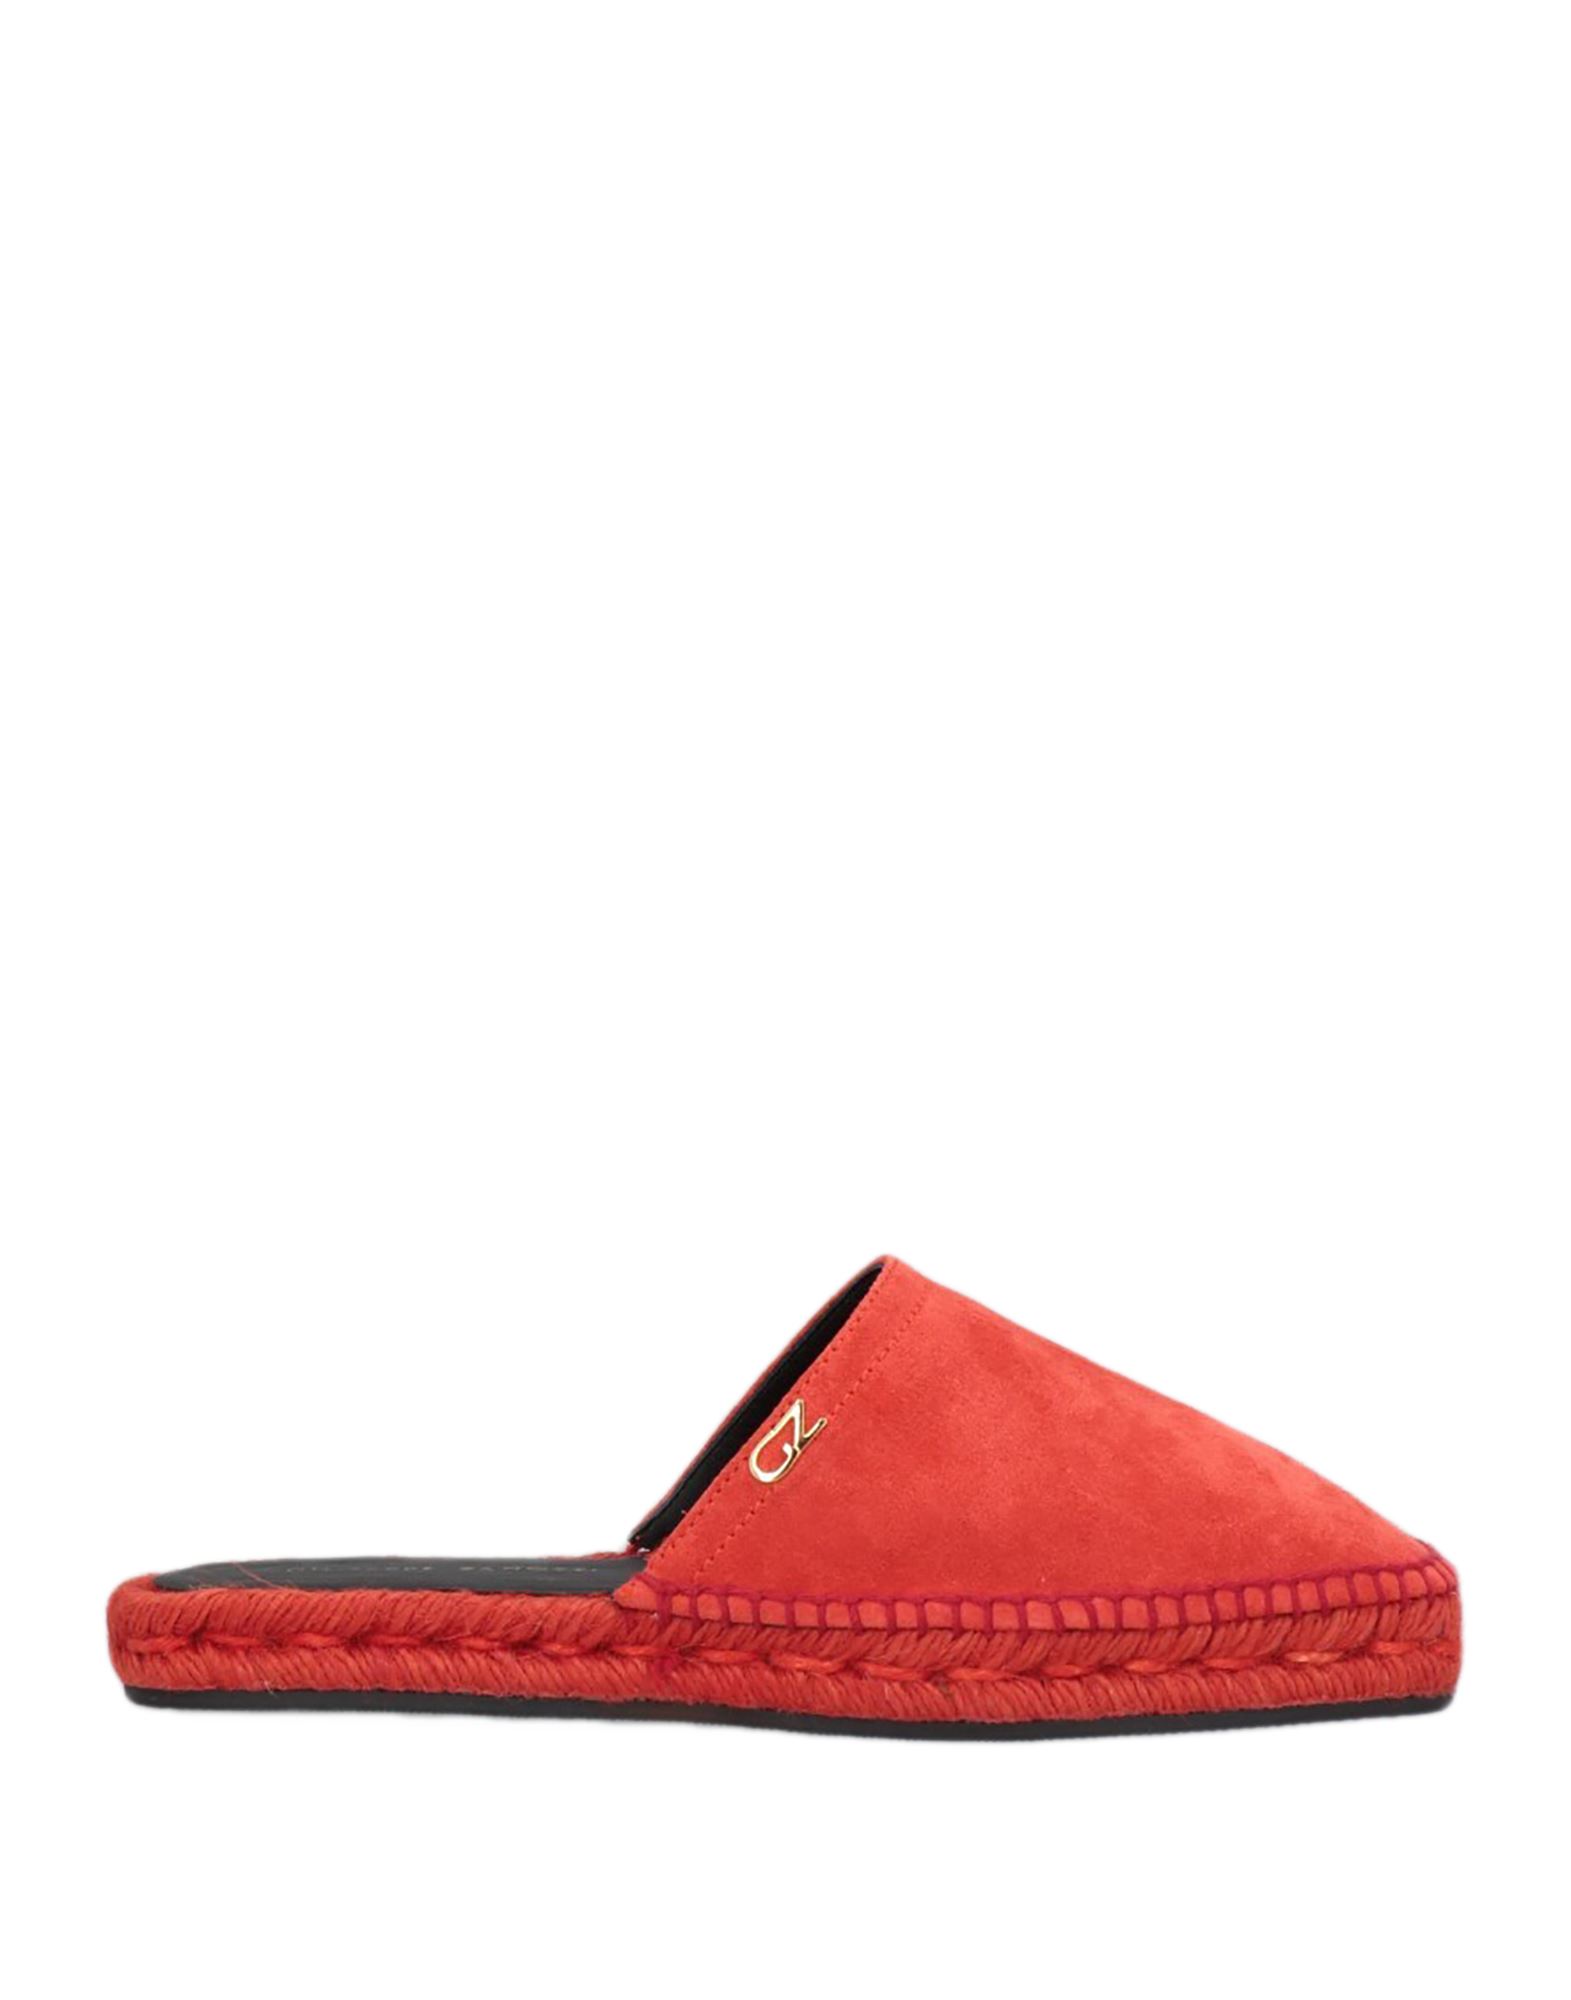 Giuseppe Zanotti Woman Mules & Clogs Coral Size 7 Soft Leather In Red